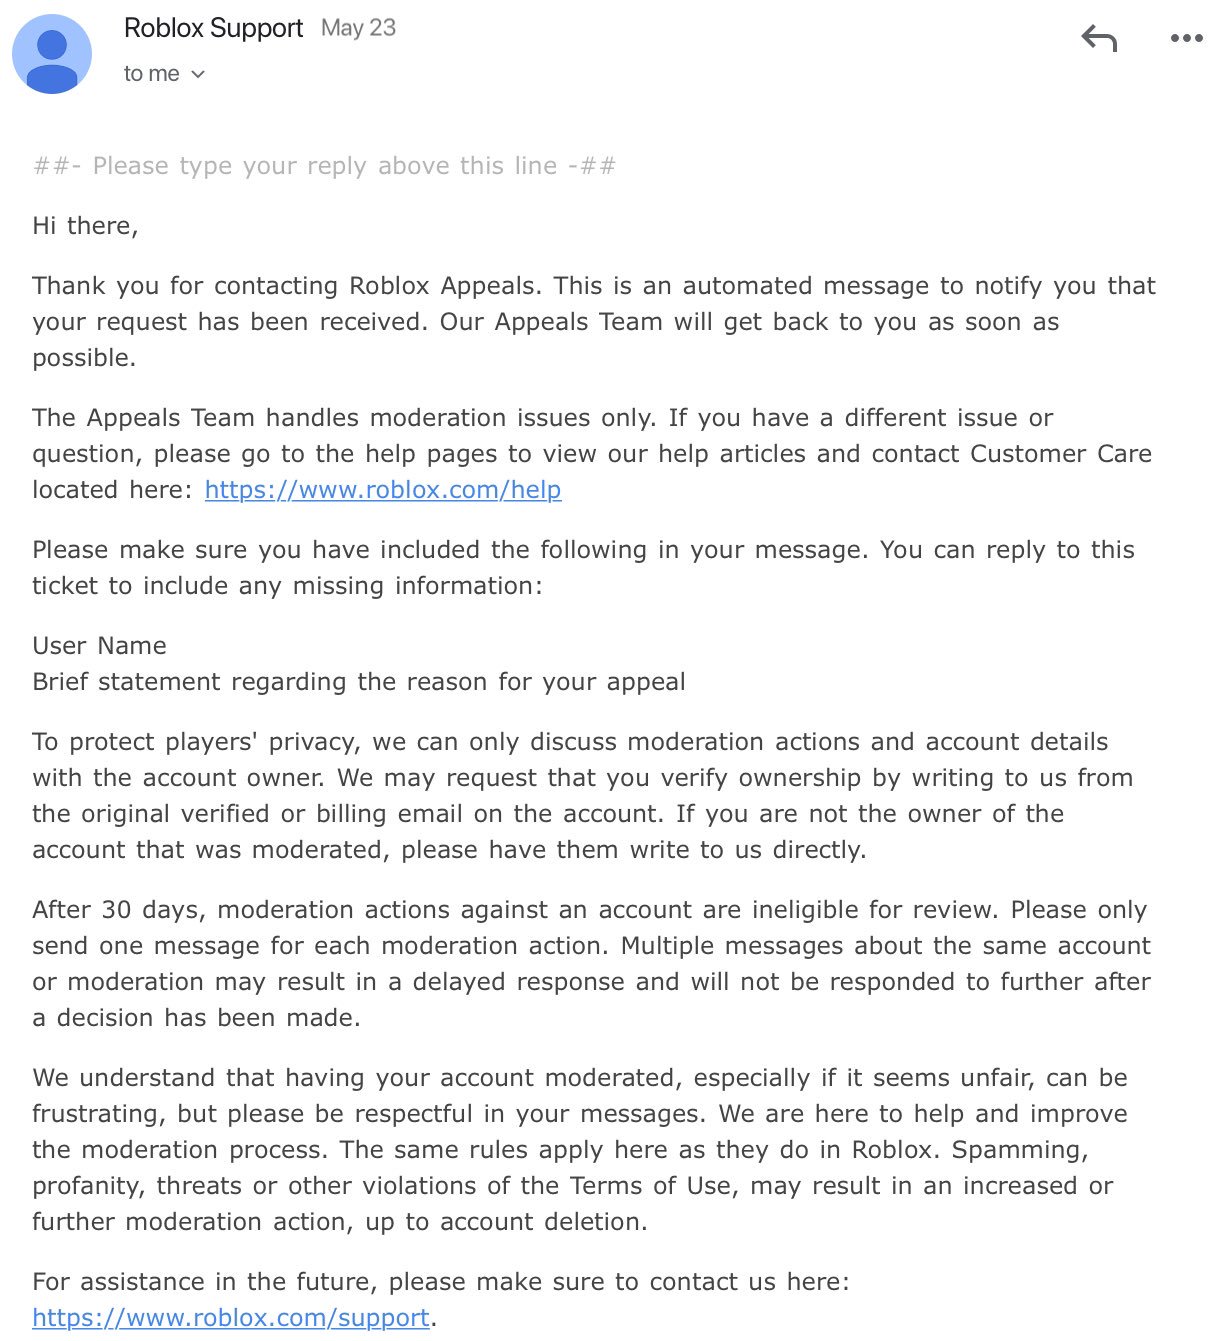 Why is Roblox not responding to my appeal? I sent an appeal 2 days ago. I  know they might be busy, I just don't know why they aren't responding, or  sending a